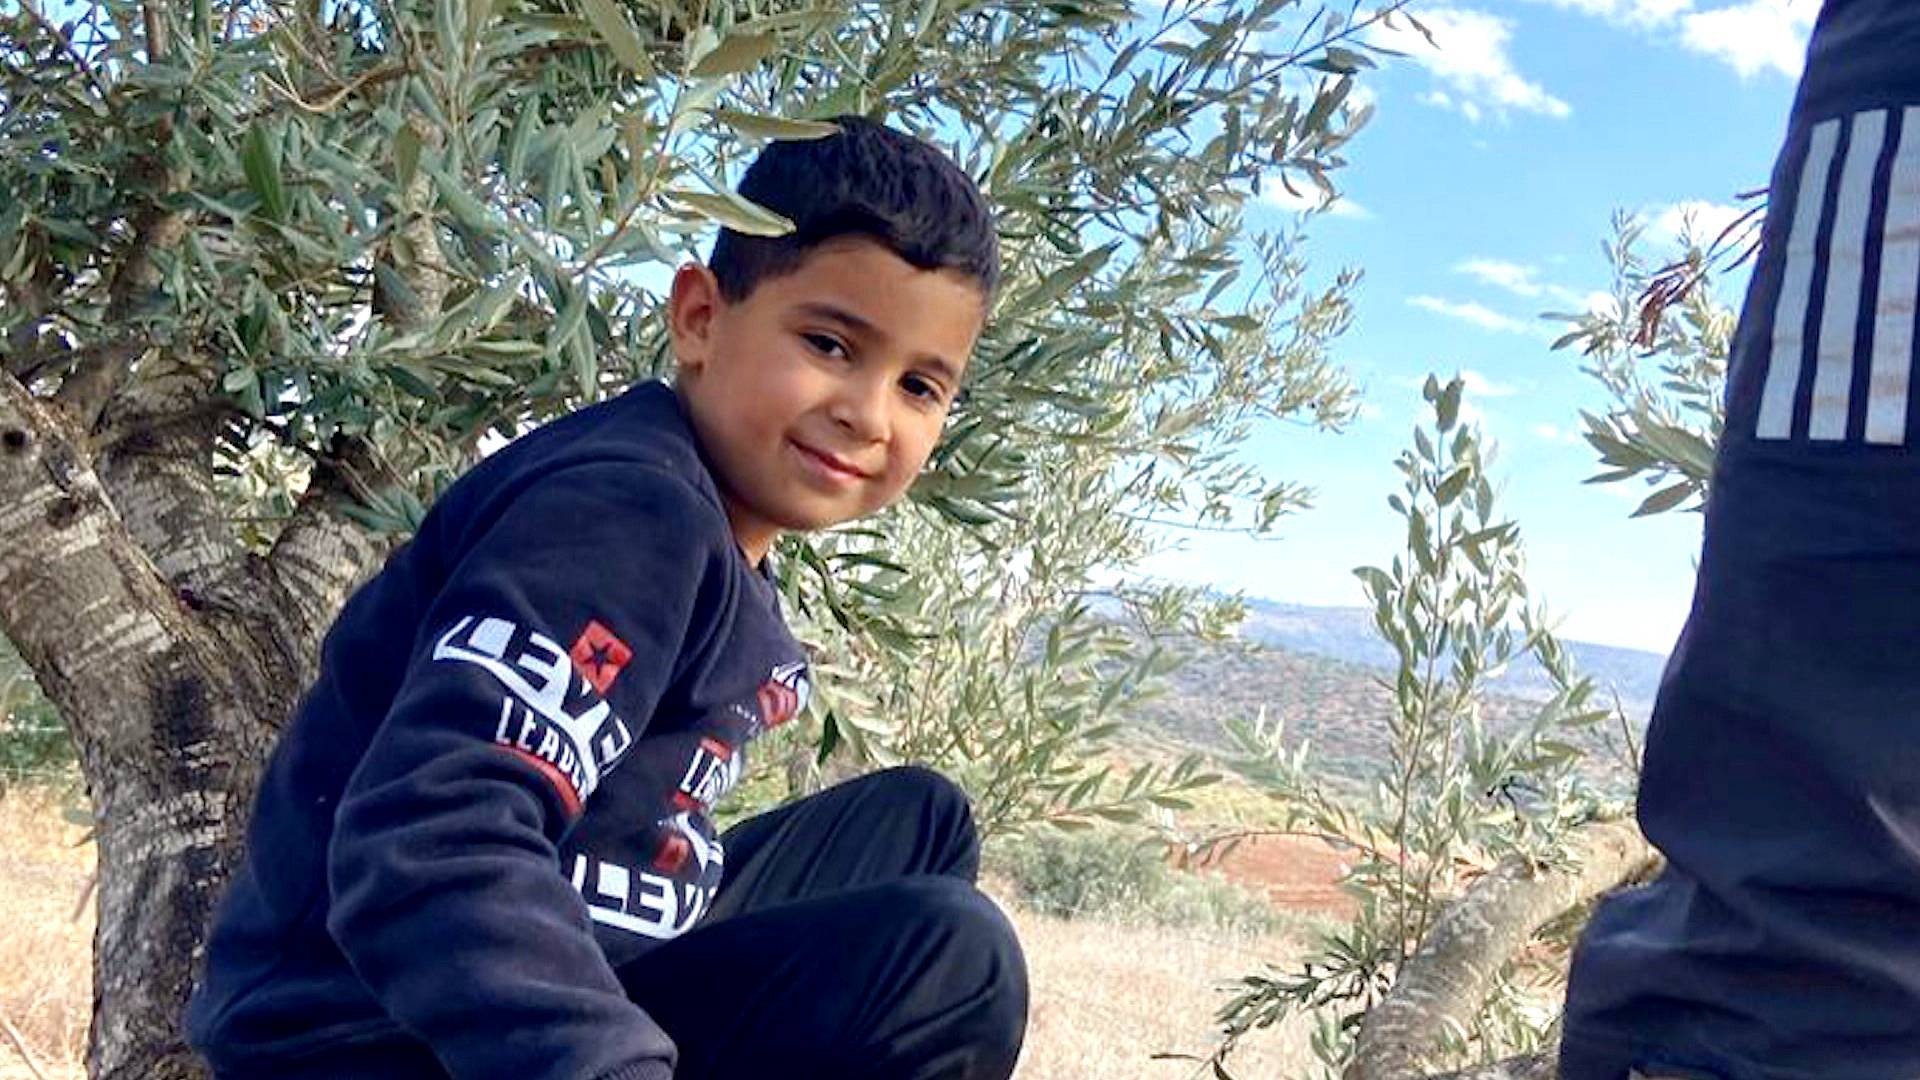 Why have so many Palestinian children been killed by Israel? | Israel-Palestine conflict